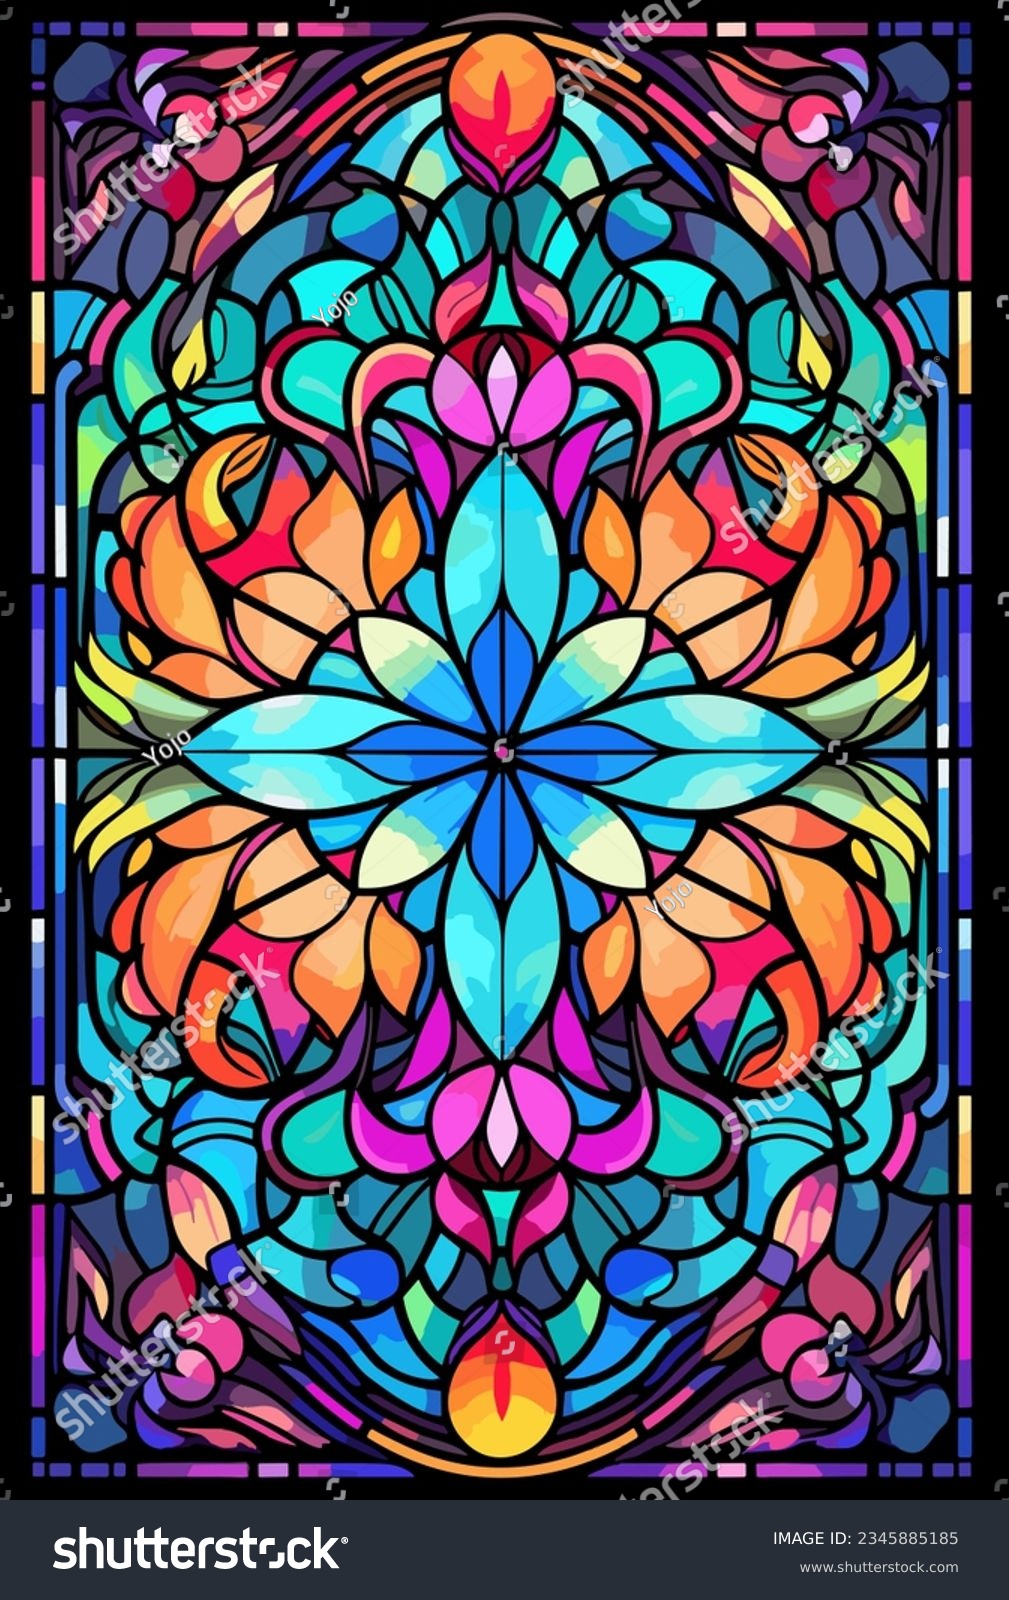 SVG of Illustration in stained glass style with abstract flowers, leaves and curls, rectangular image. Vector illustration. svg